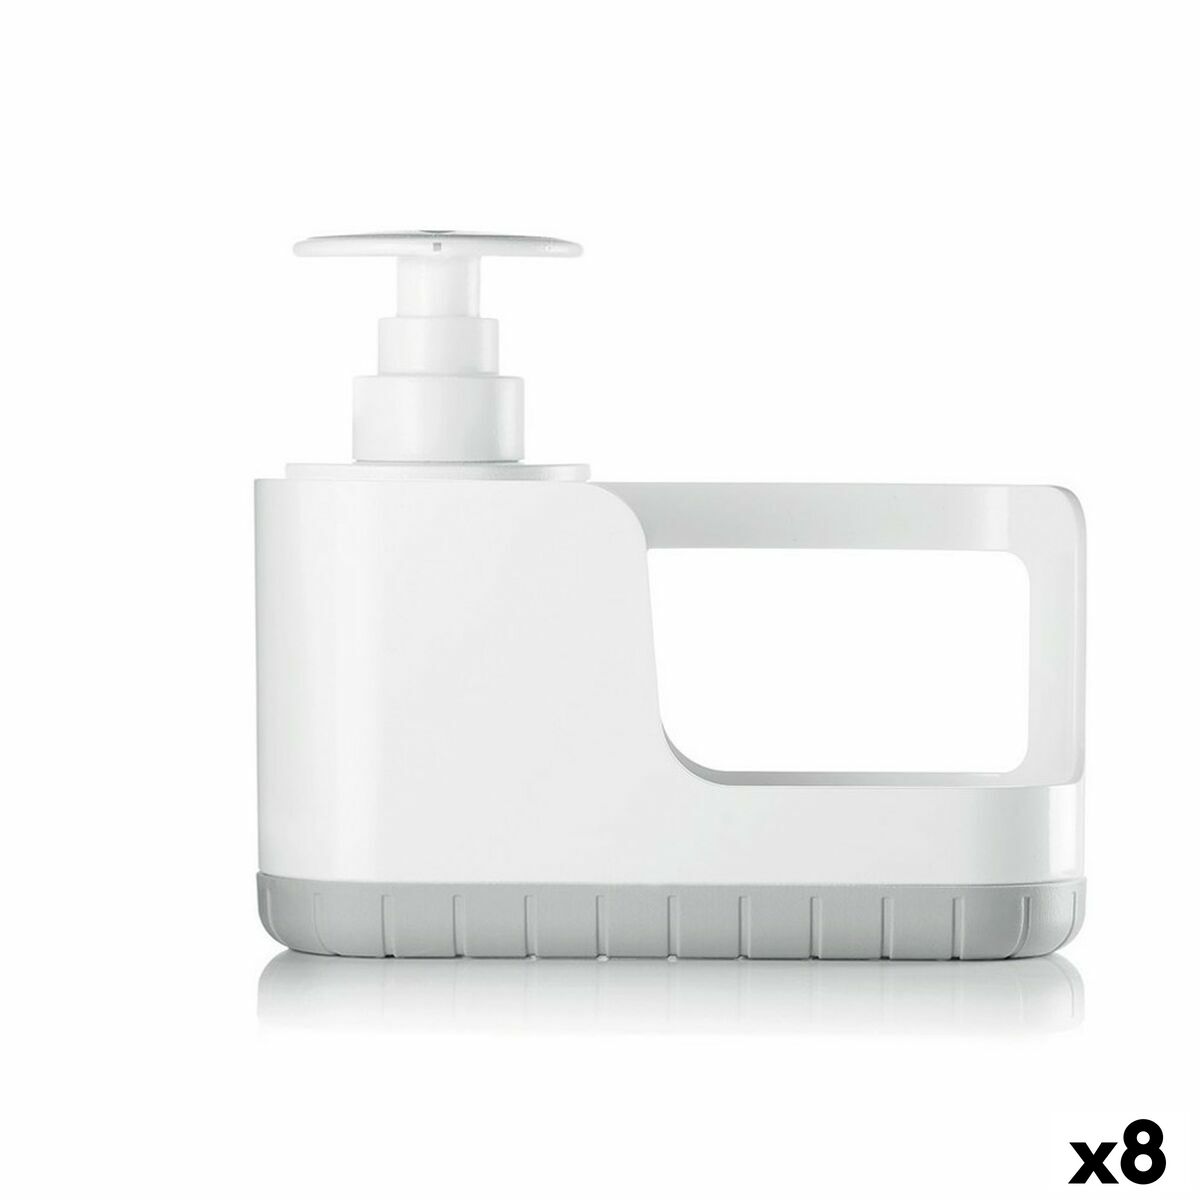 2-in-1 Soap Dispenser for the Kitchen Sink Confortime ABS polypropylene White Grey (8 Units)